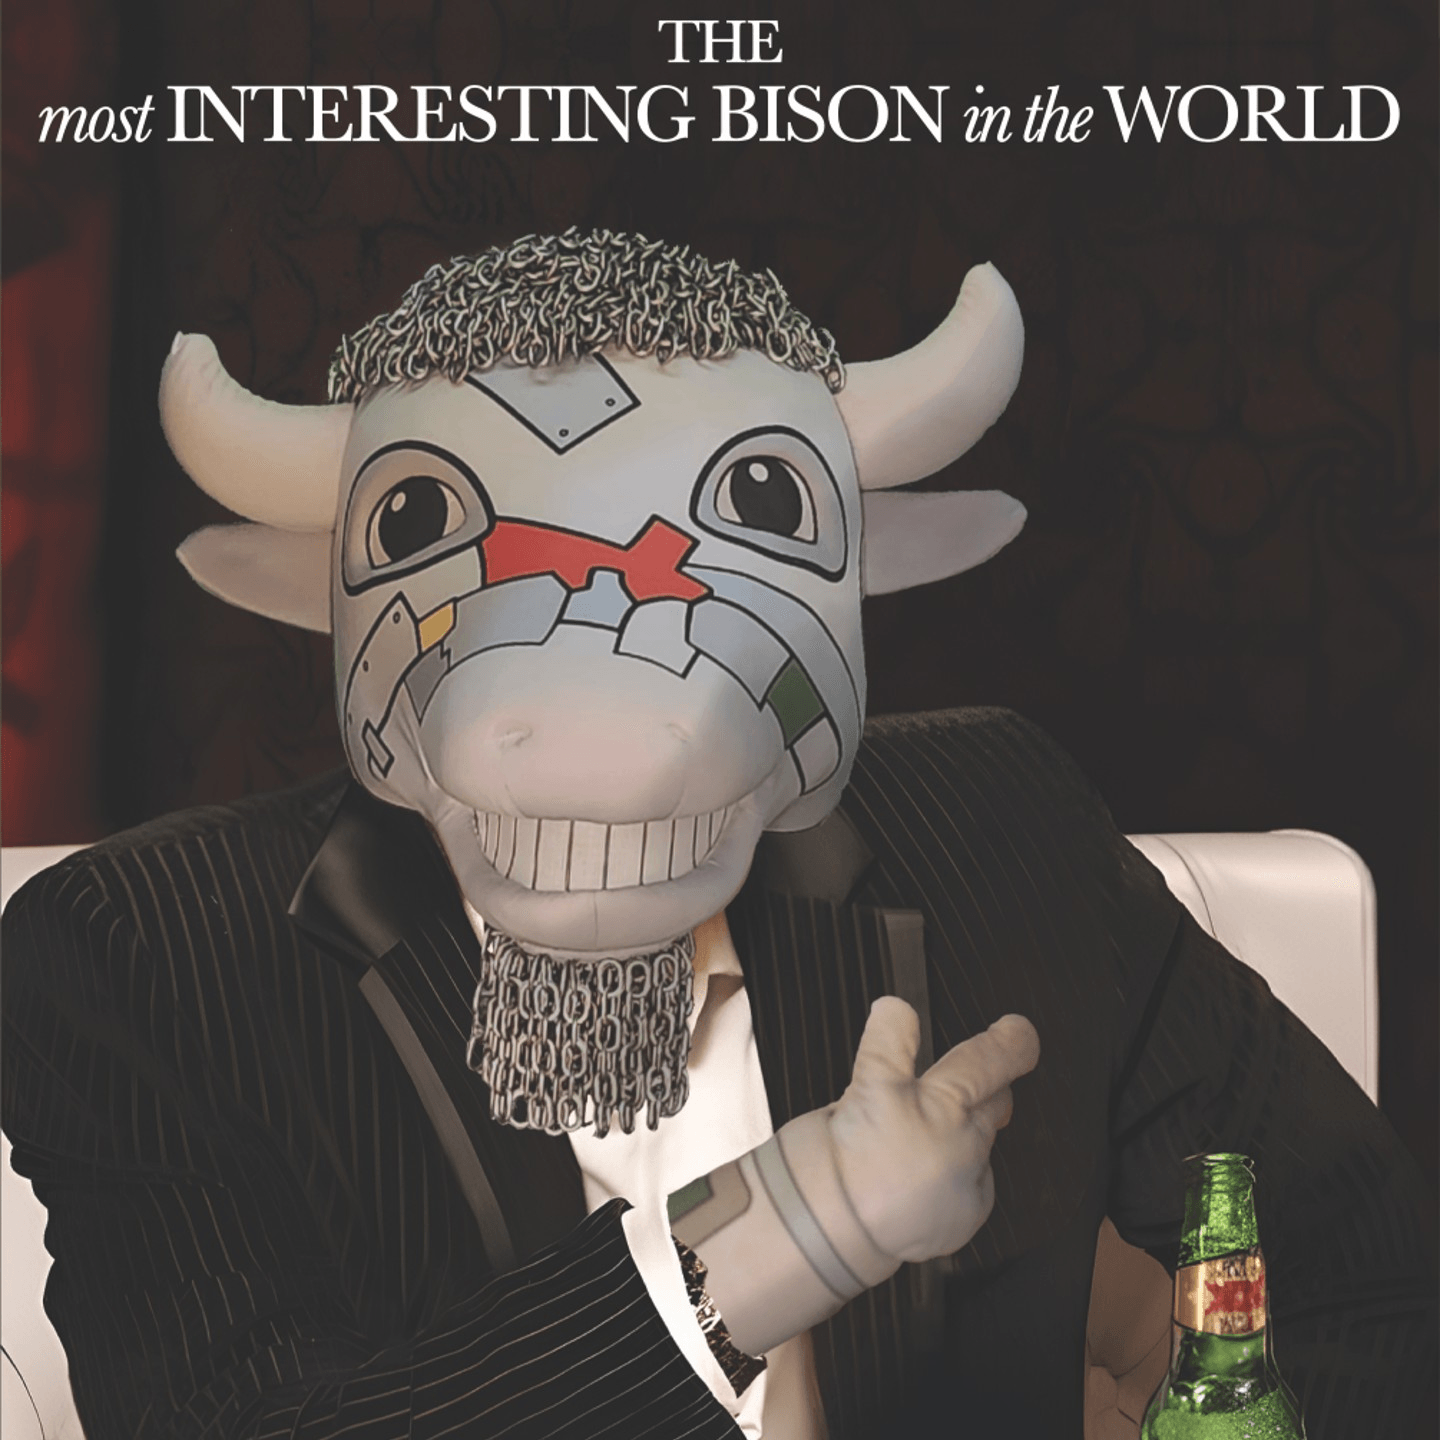 THE most INTERESTING BISON in the WORLD